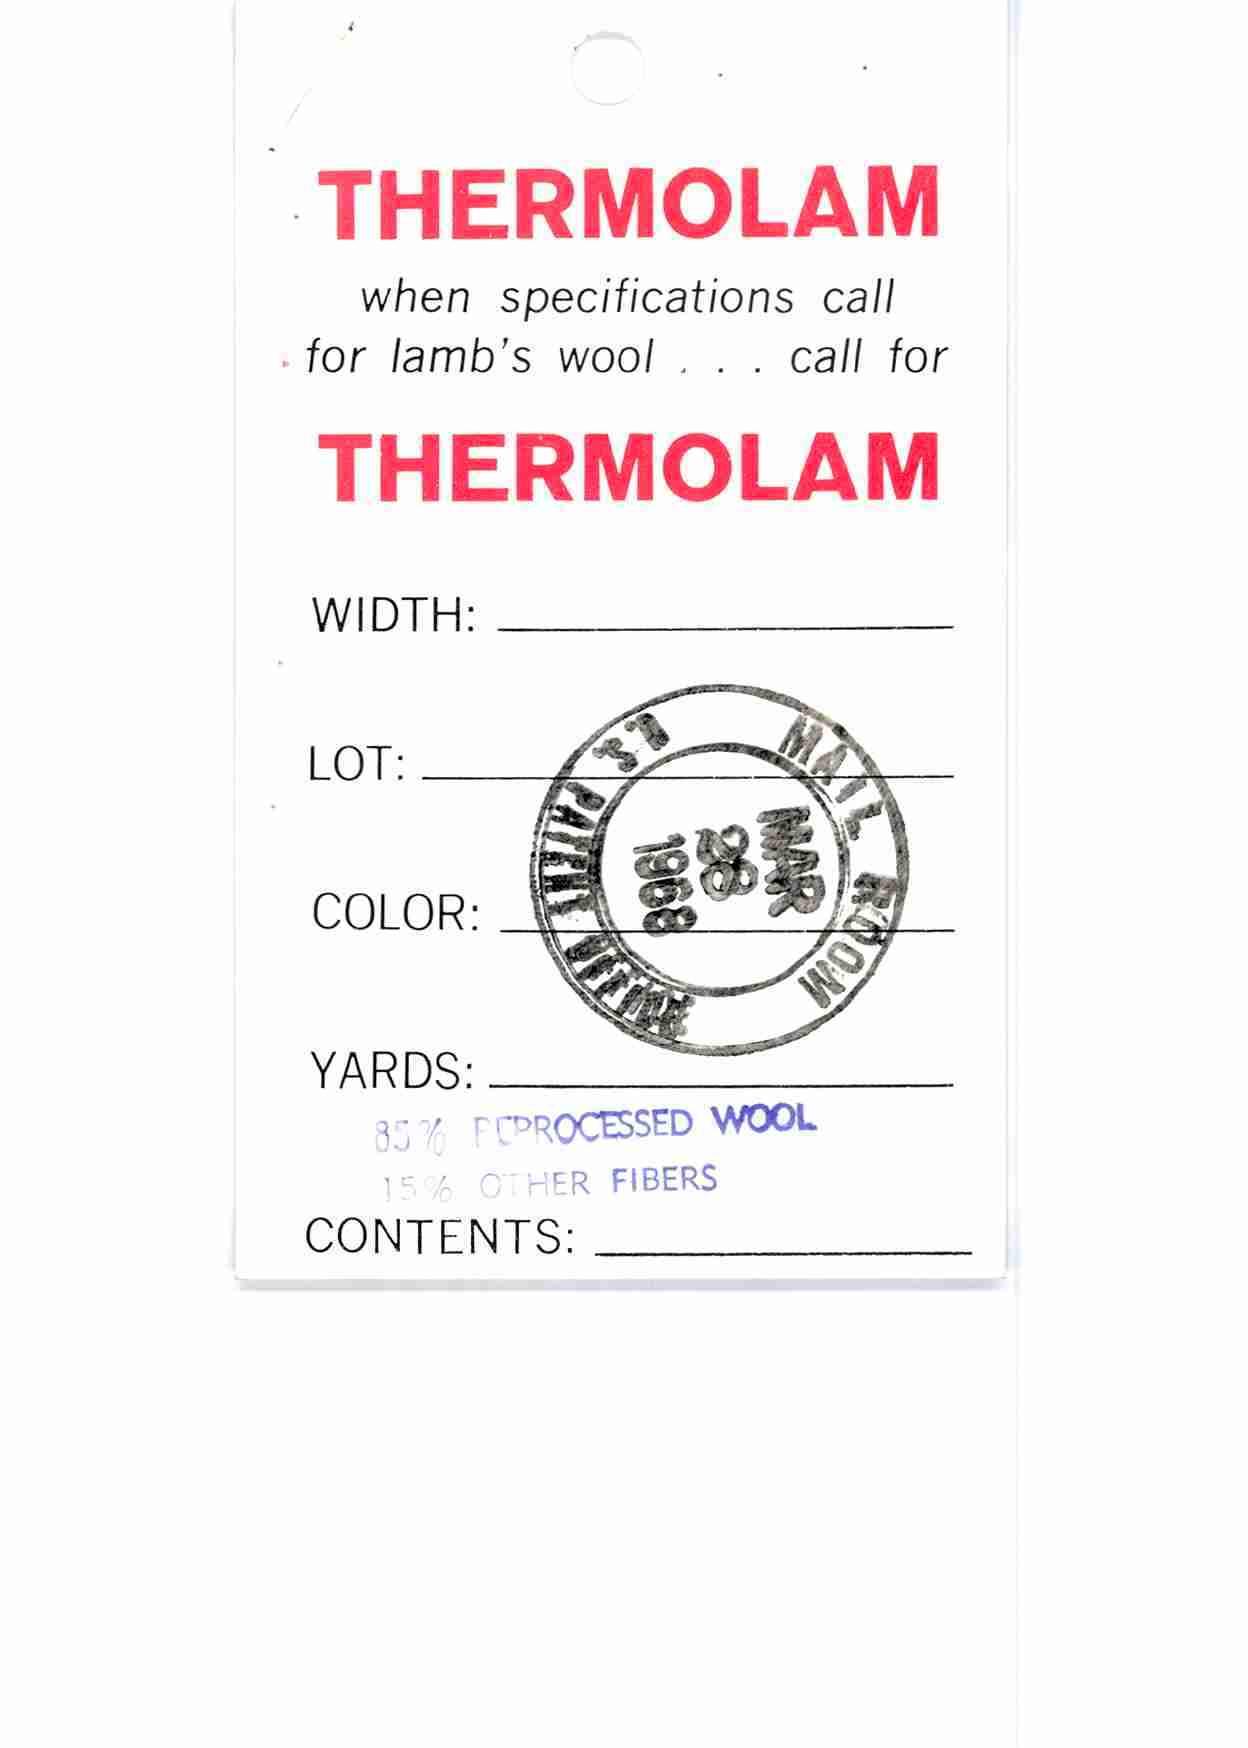  THERMOLAM